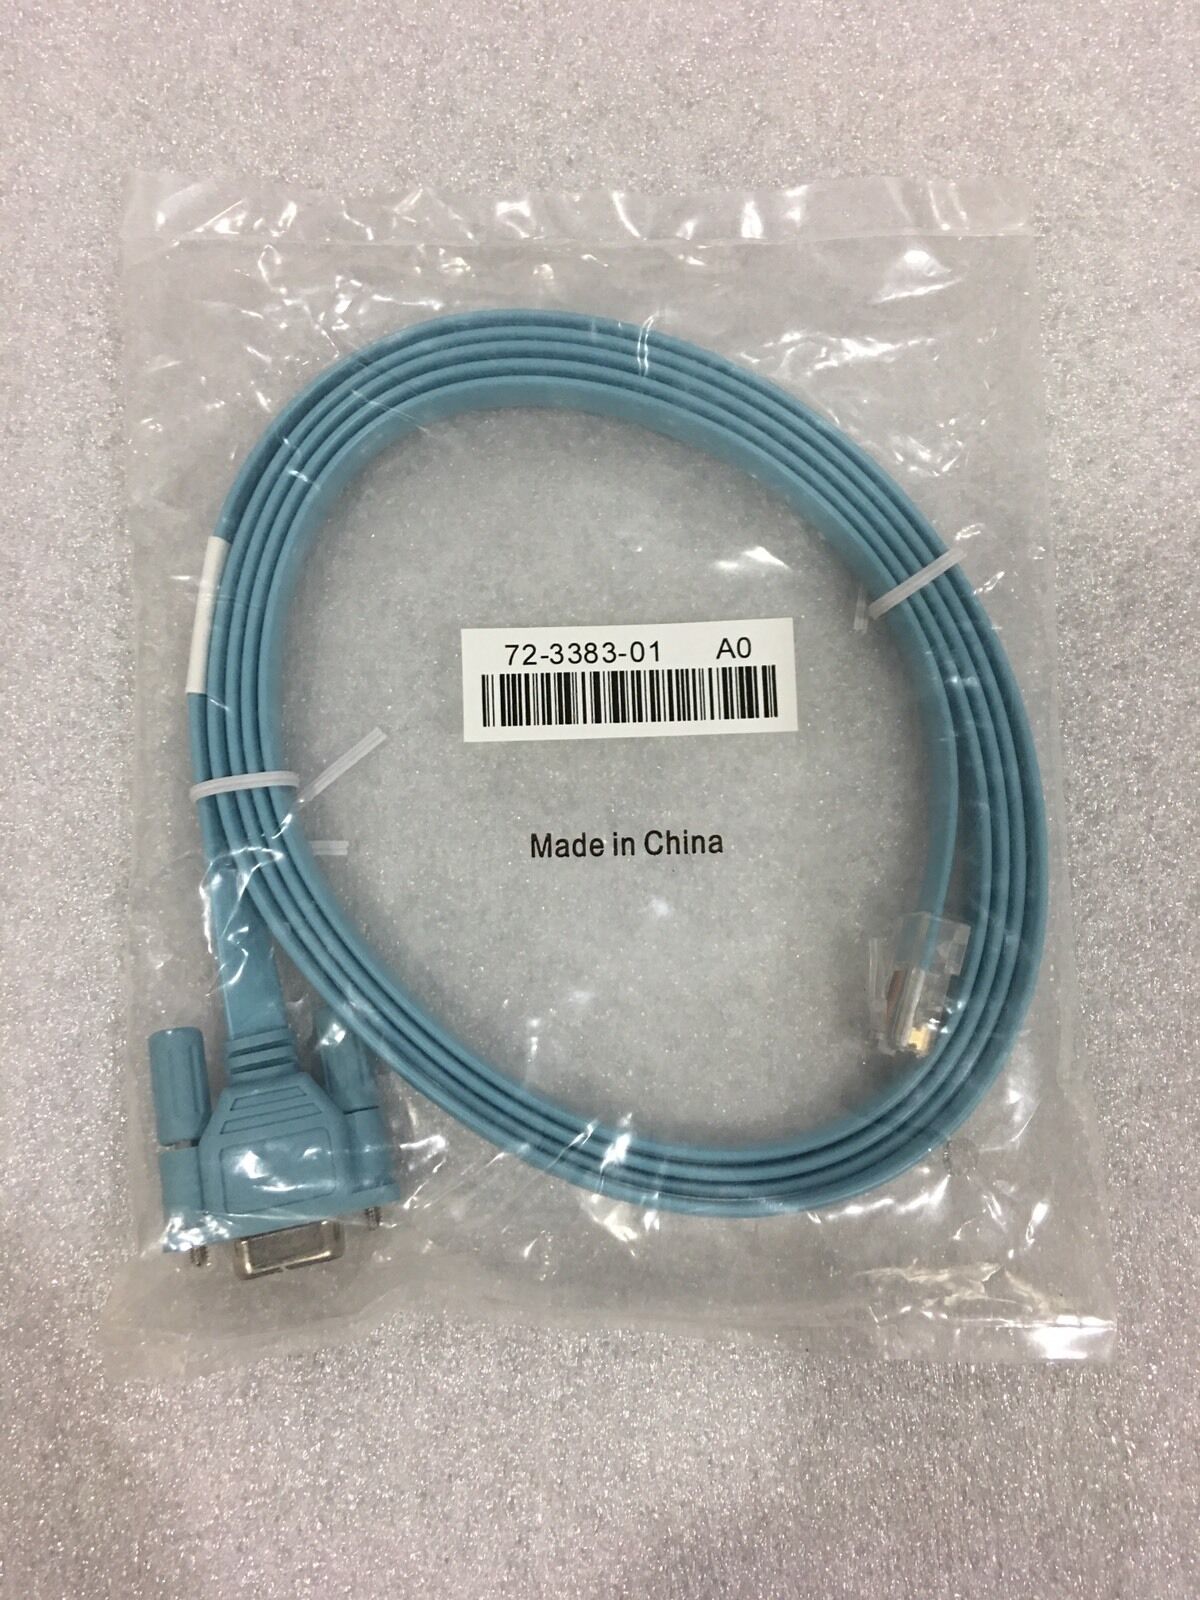 Cisco DB9 to RJ45 6ft Flat - 72-3383-01 Networking Regular discount Ribbon Cable Los Angeles Mall